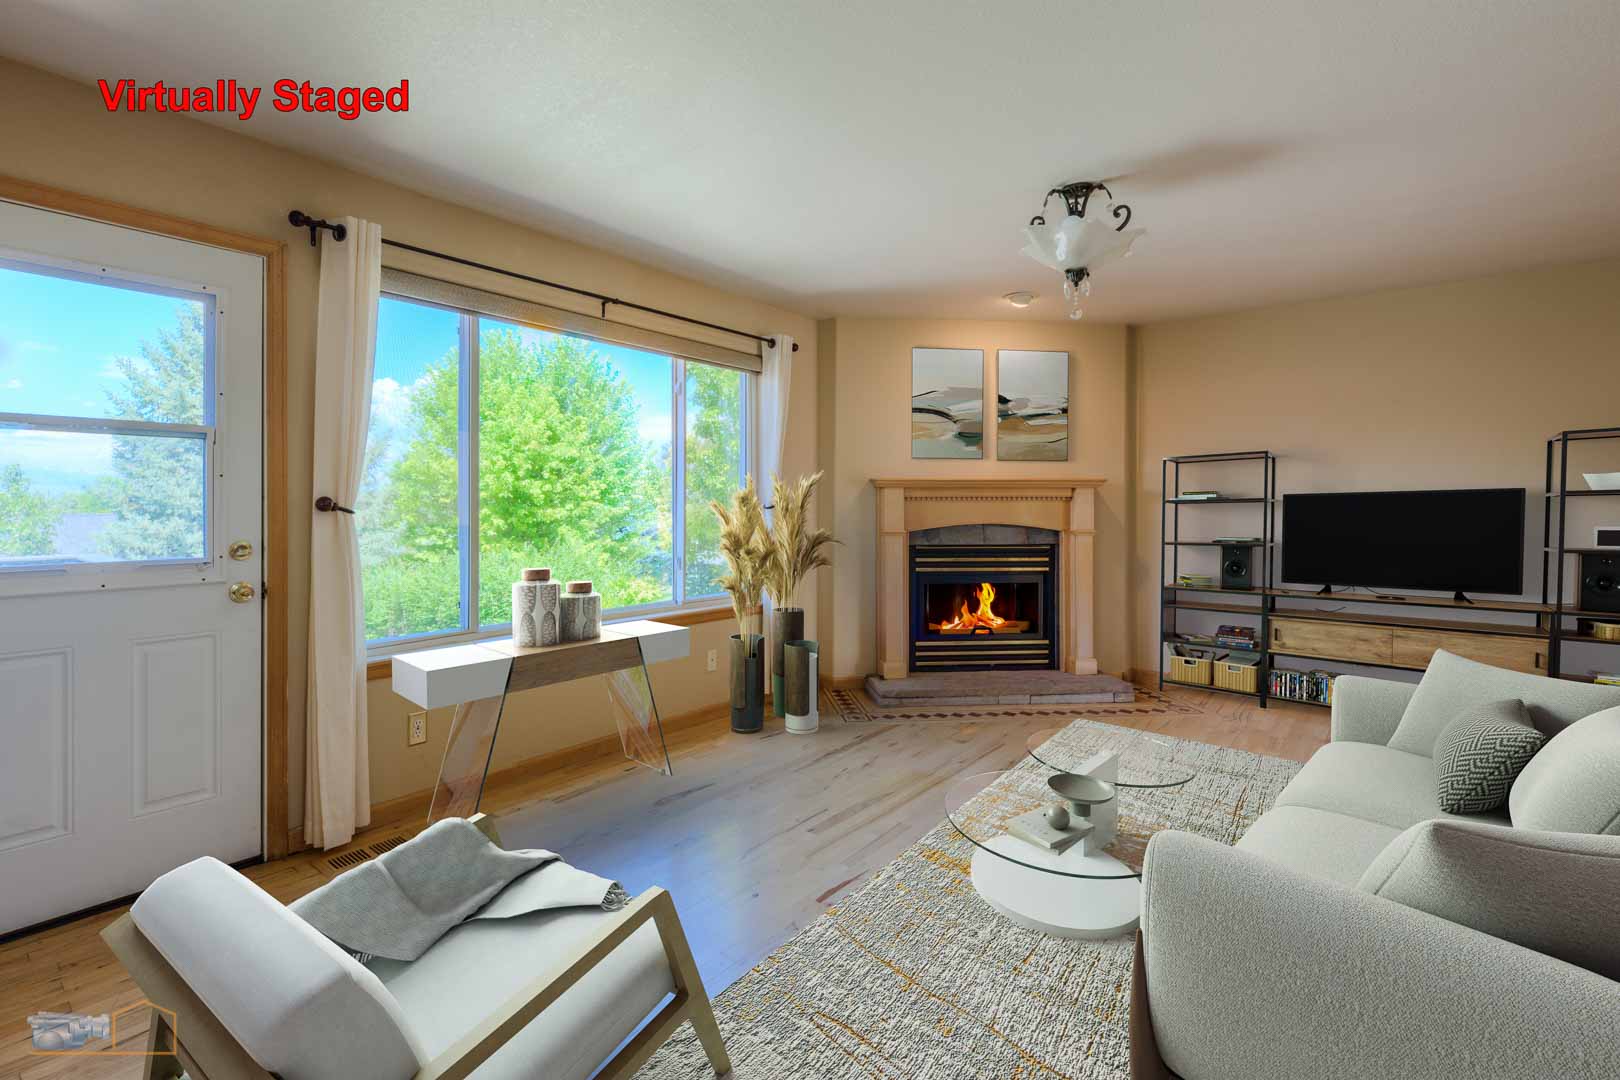 0356 07a Living Room1 5TMDE RVT3 Fireplace PSAI AD 31 07 23 07 55 Print Web - Virtual Staging